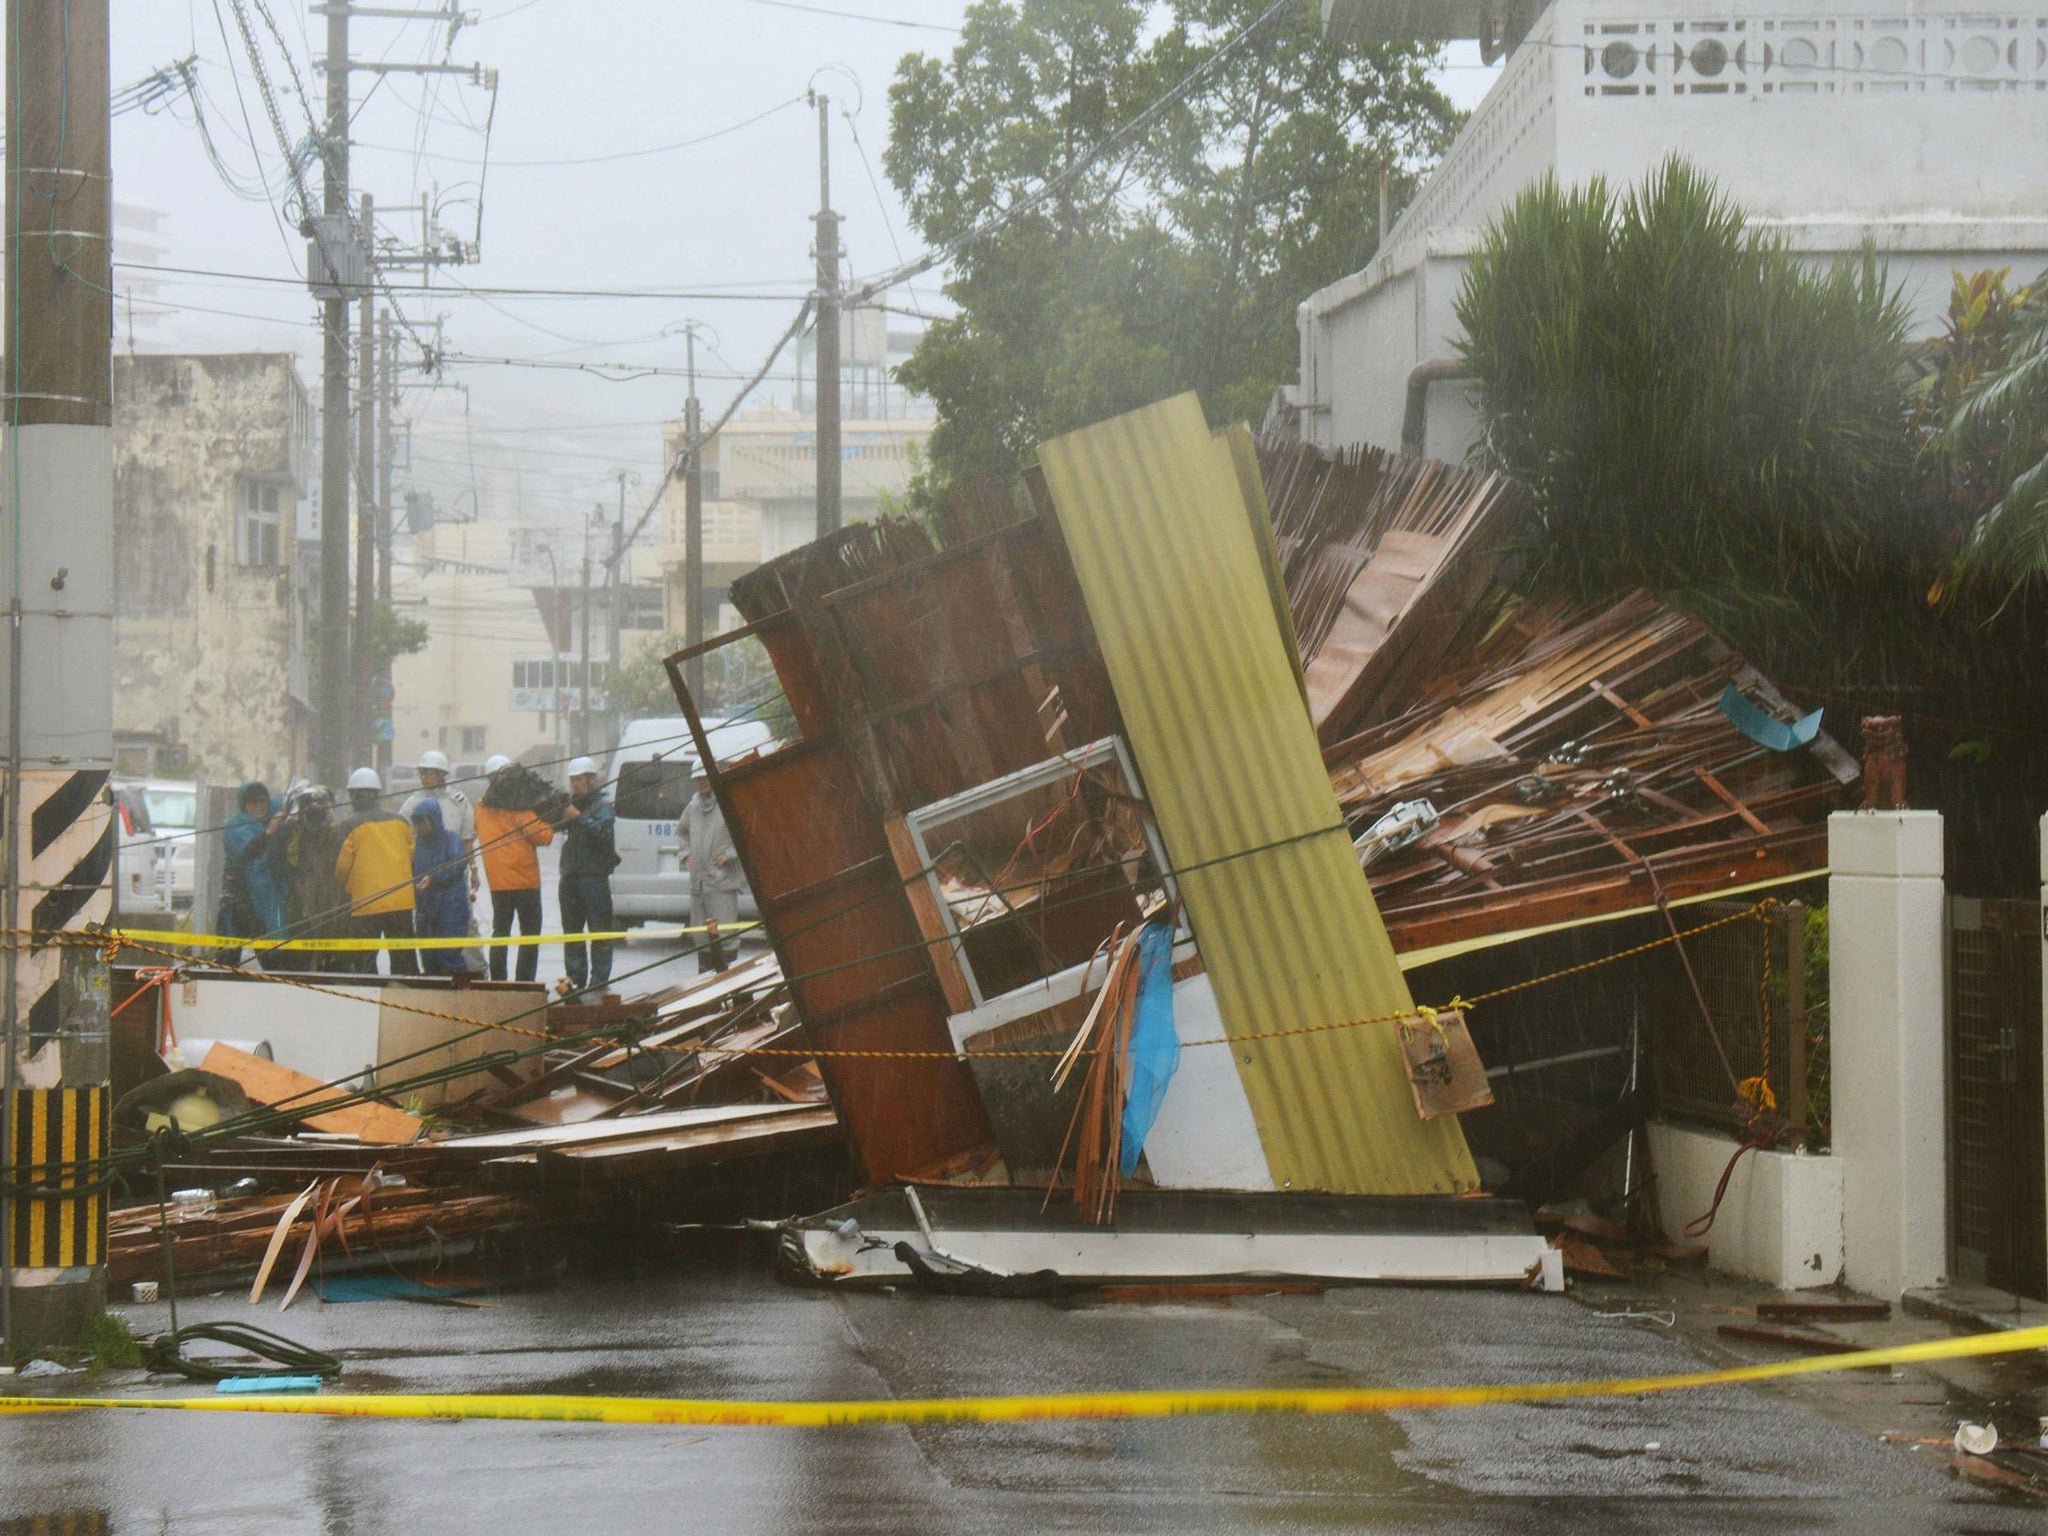 A wooden house collapsed due to strong winds caused by Typhoon Neoguri in Naha, on Japan's southern island of Okinawa